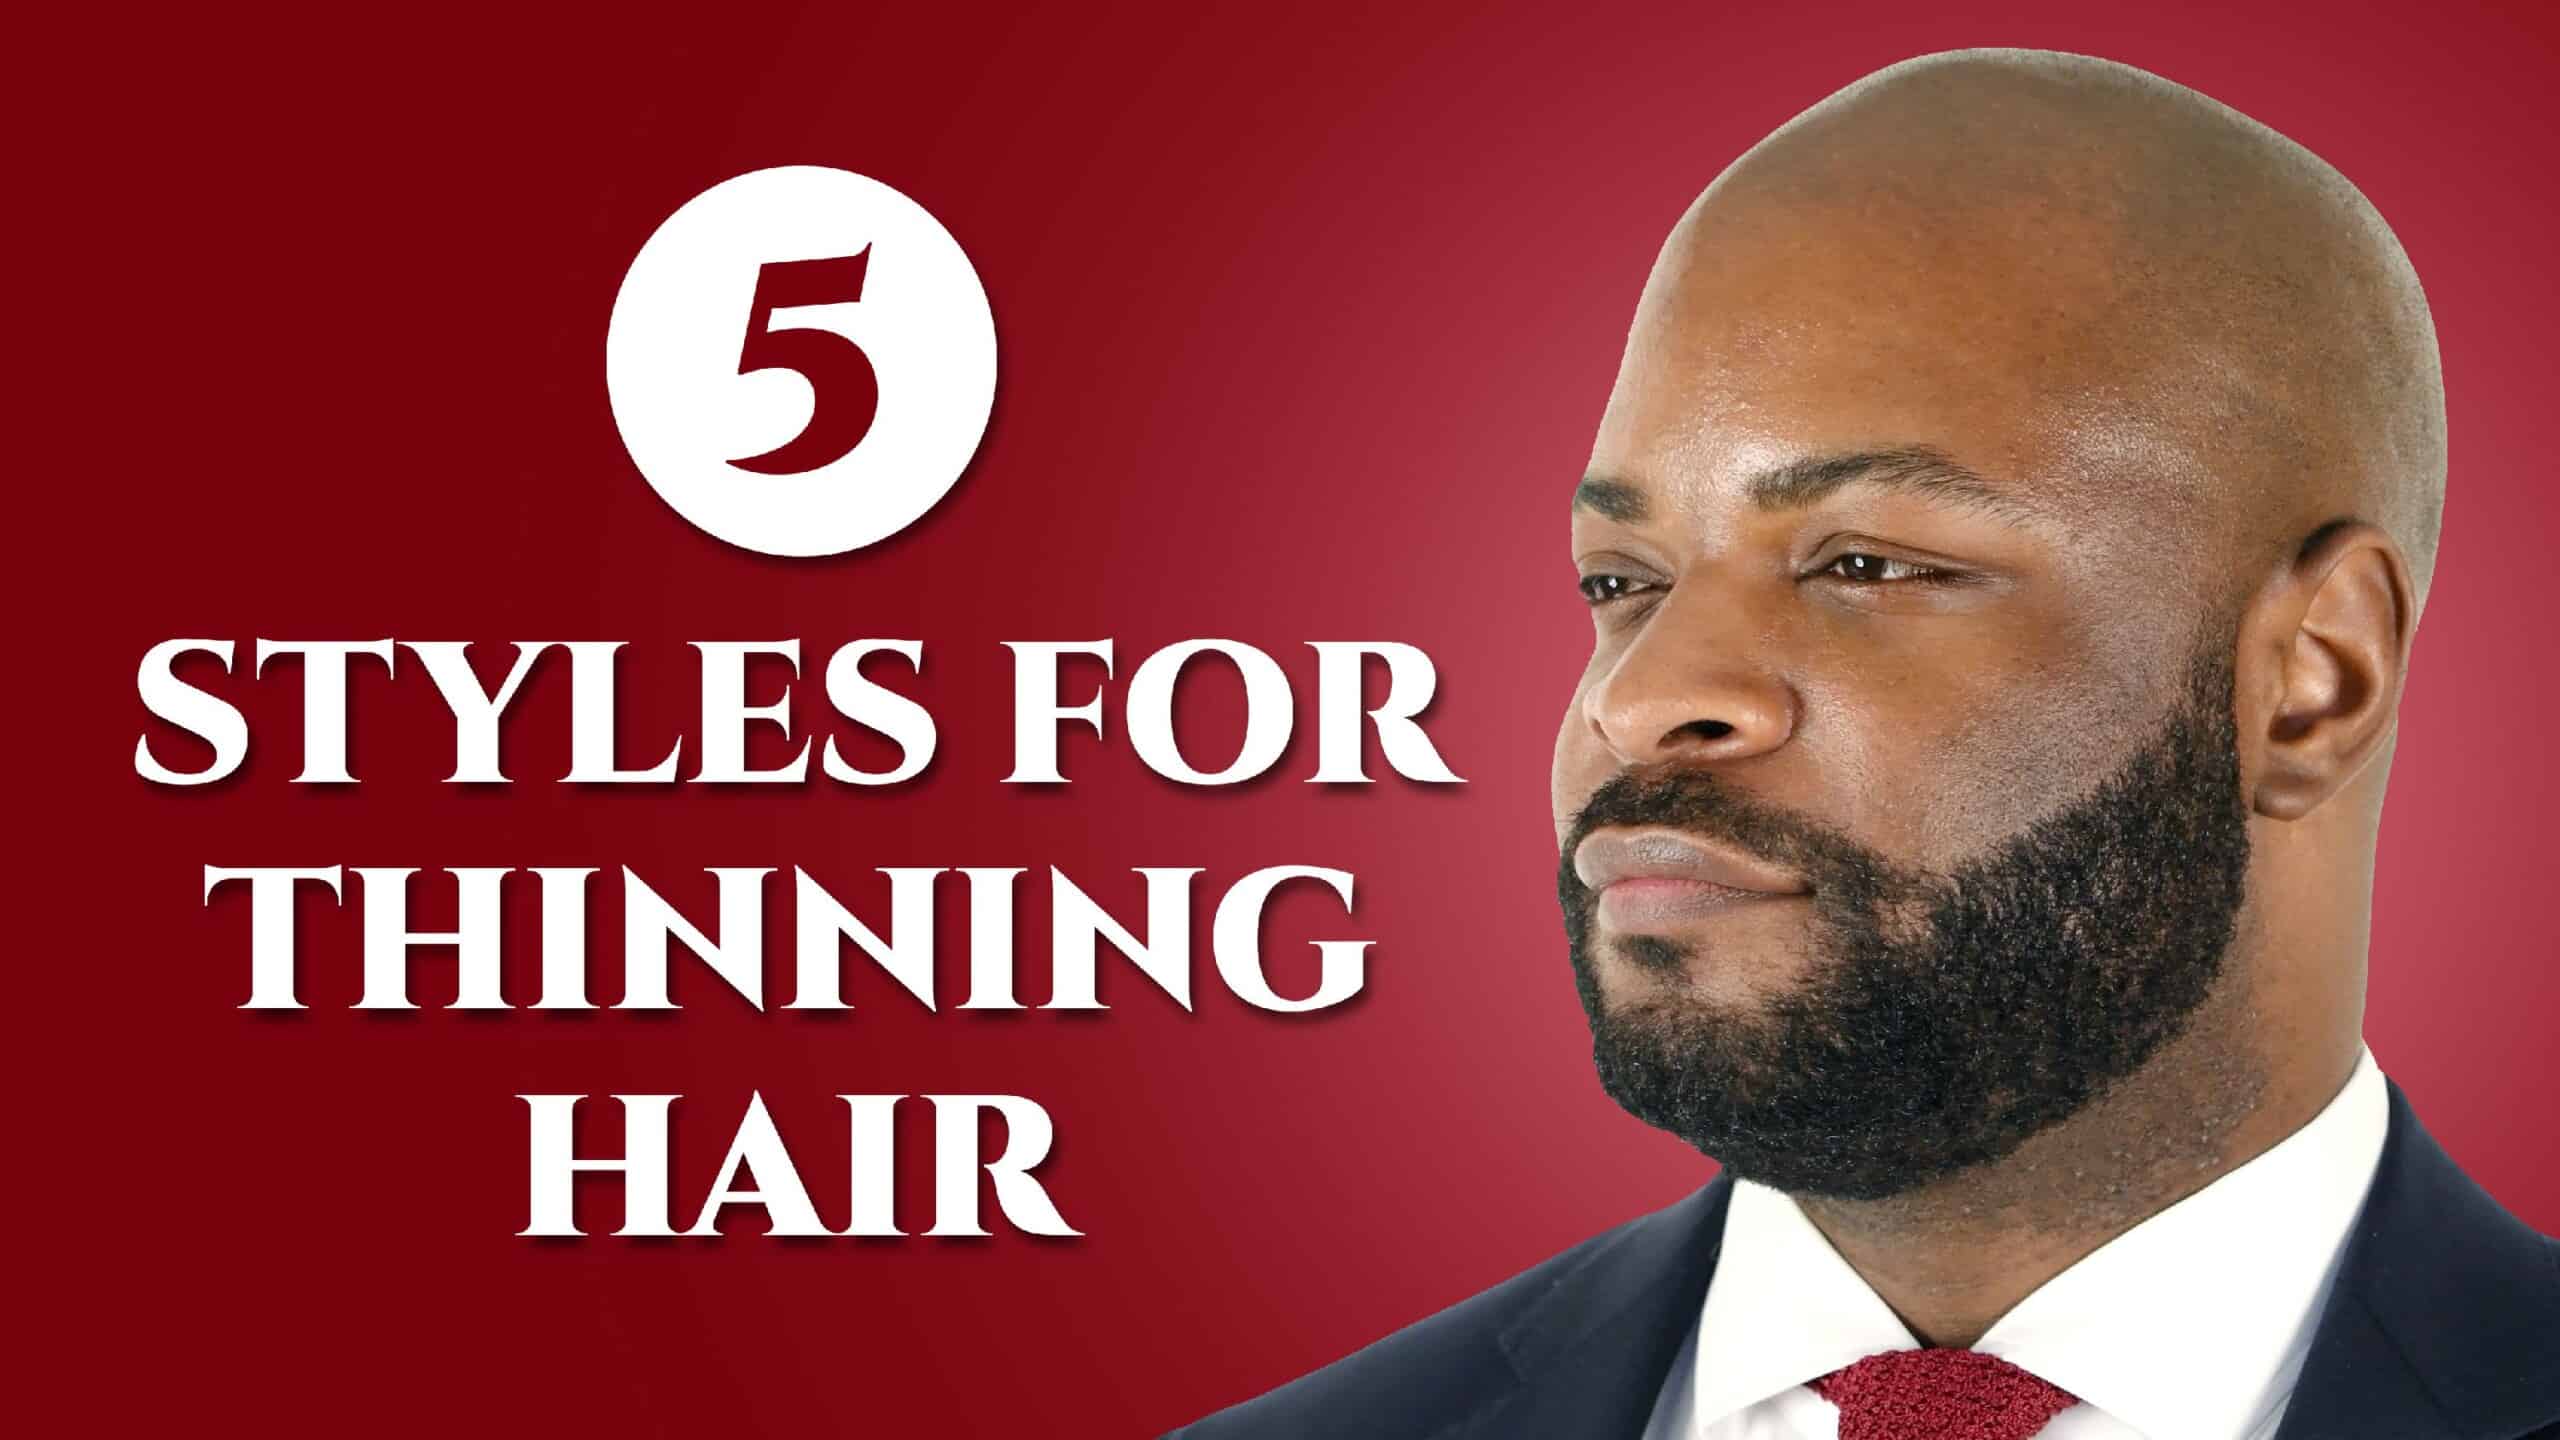 Bald on Top Hair on Sides: 14 Awesome Styles for Balding Men